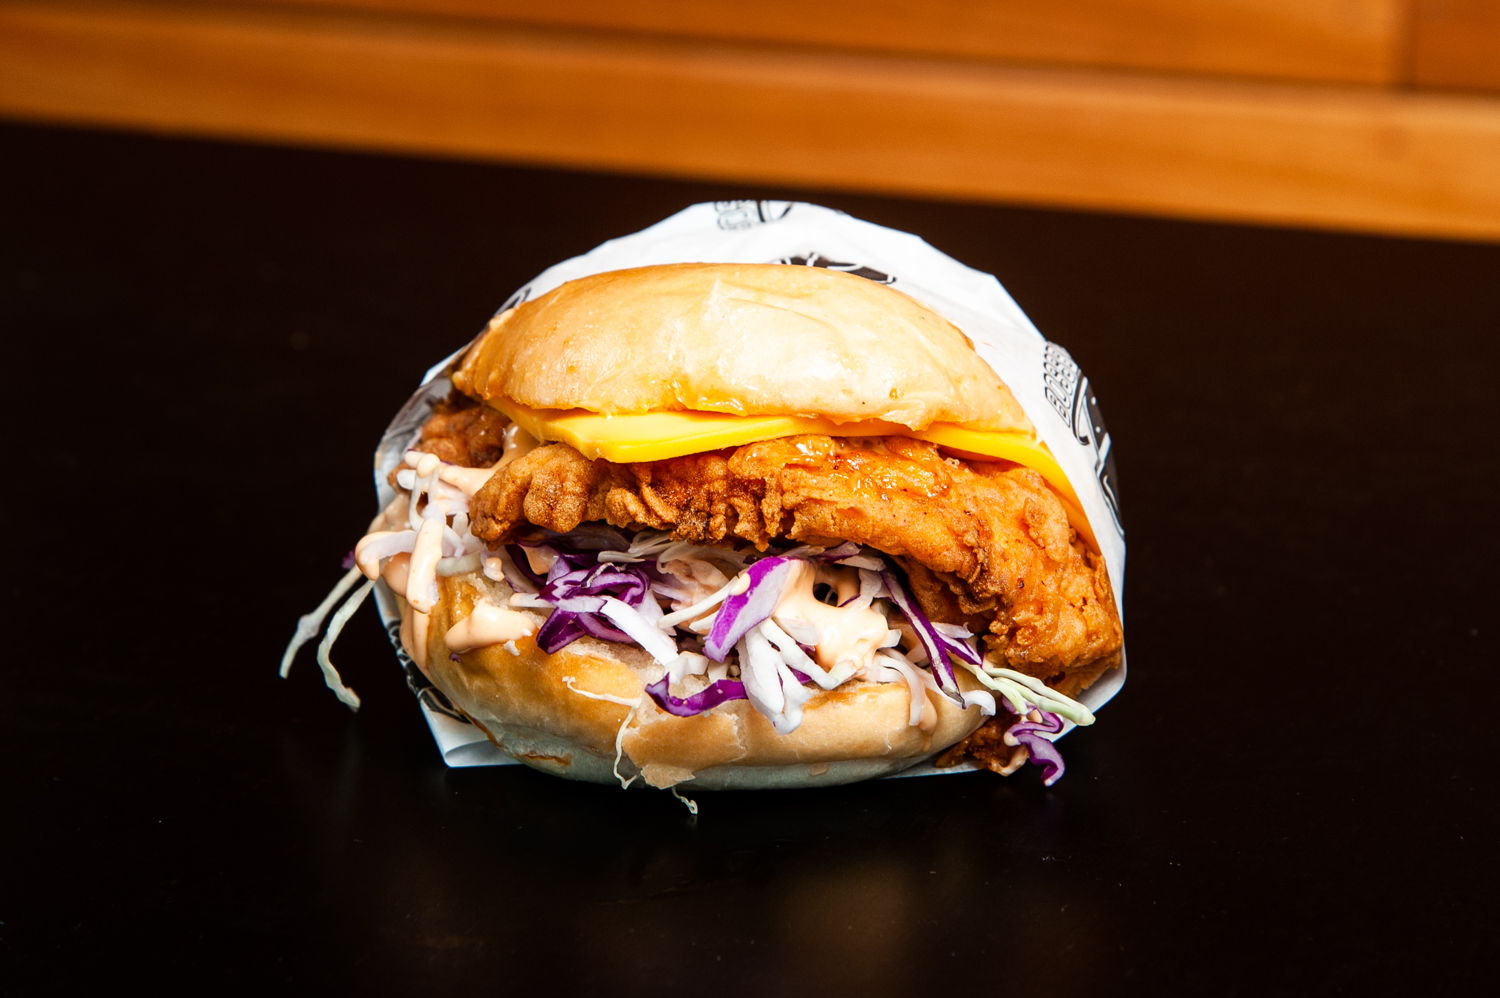 6. Tommy The Chook - Boss Burger Co